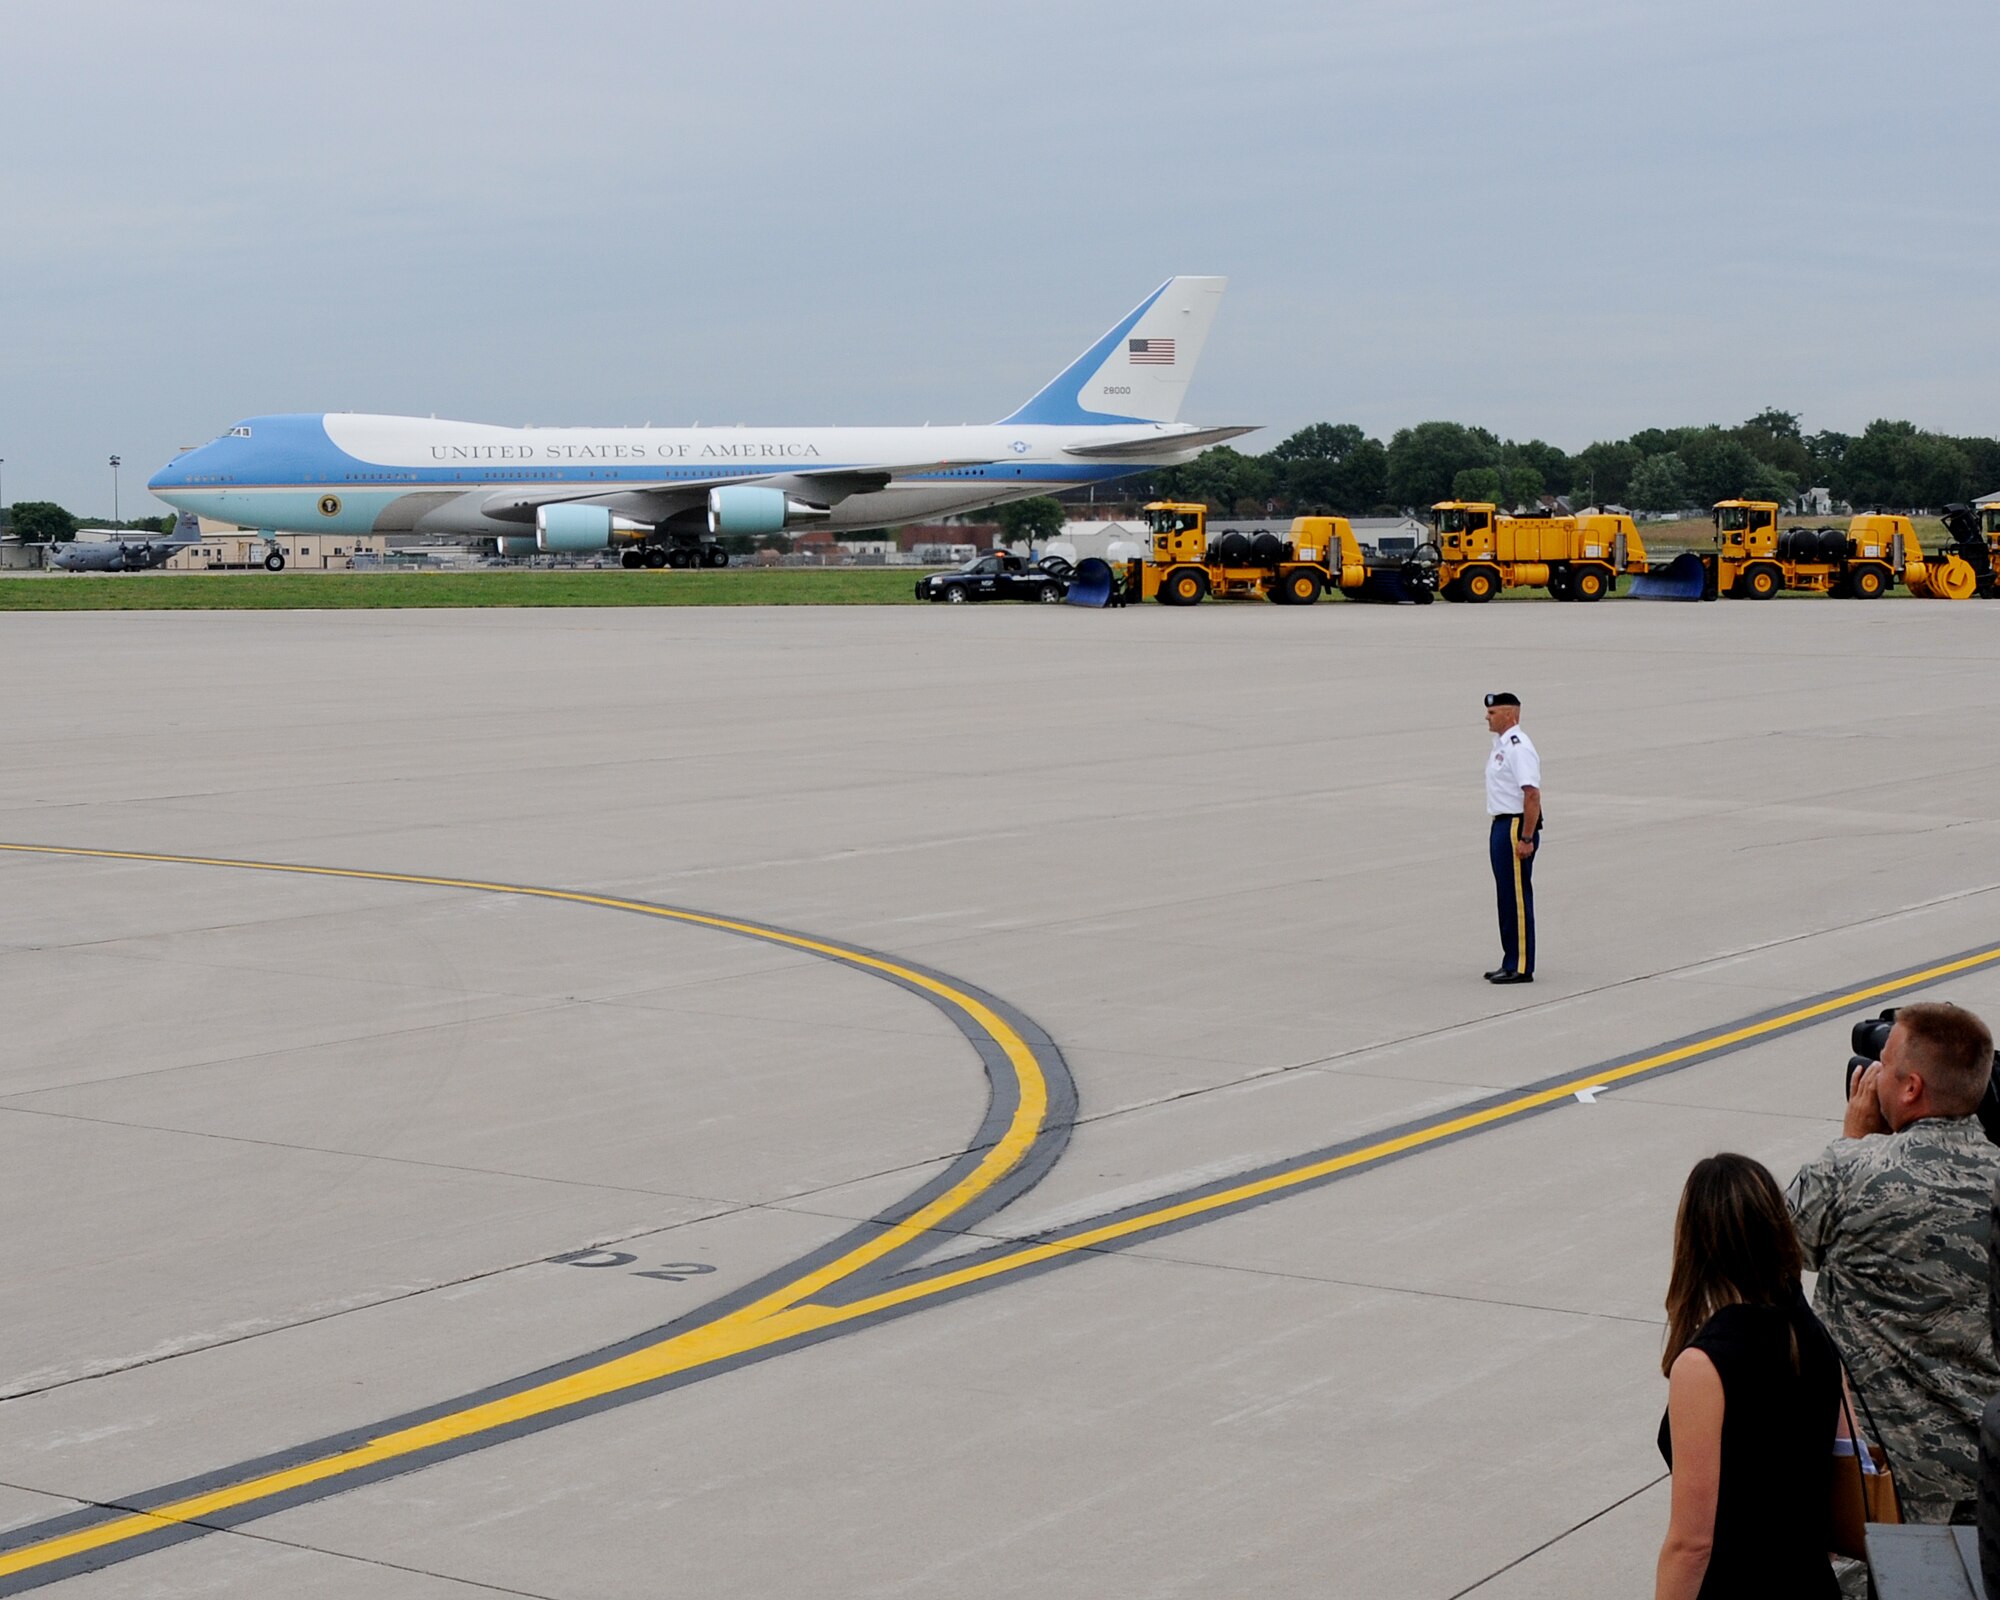 Air Force One makes the turn into the ramp of the 133rd Airlift Wing bringing President Barack Obama to the Minneapolis-St. Paul International Airport on August 30, 2011. The VC-25A, which is a highly customized Boeing 747-200B, arrived at the Minnesota Air National Guard base bringing the commander-in-chief to the Twin Cities where he delivered a speech to the American Legion Annual Conference. The visit is heavily supported with security, logistics, media and other support by the Airmen of the 133rd Airlift Wing. USAF official photo by Senior Master Sgt. Mark Moss